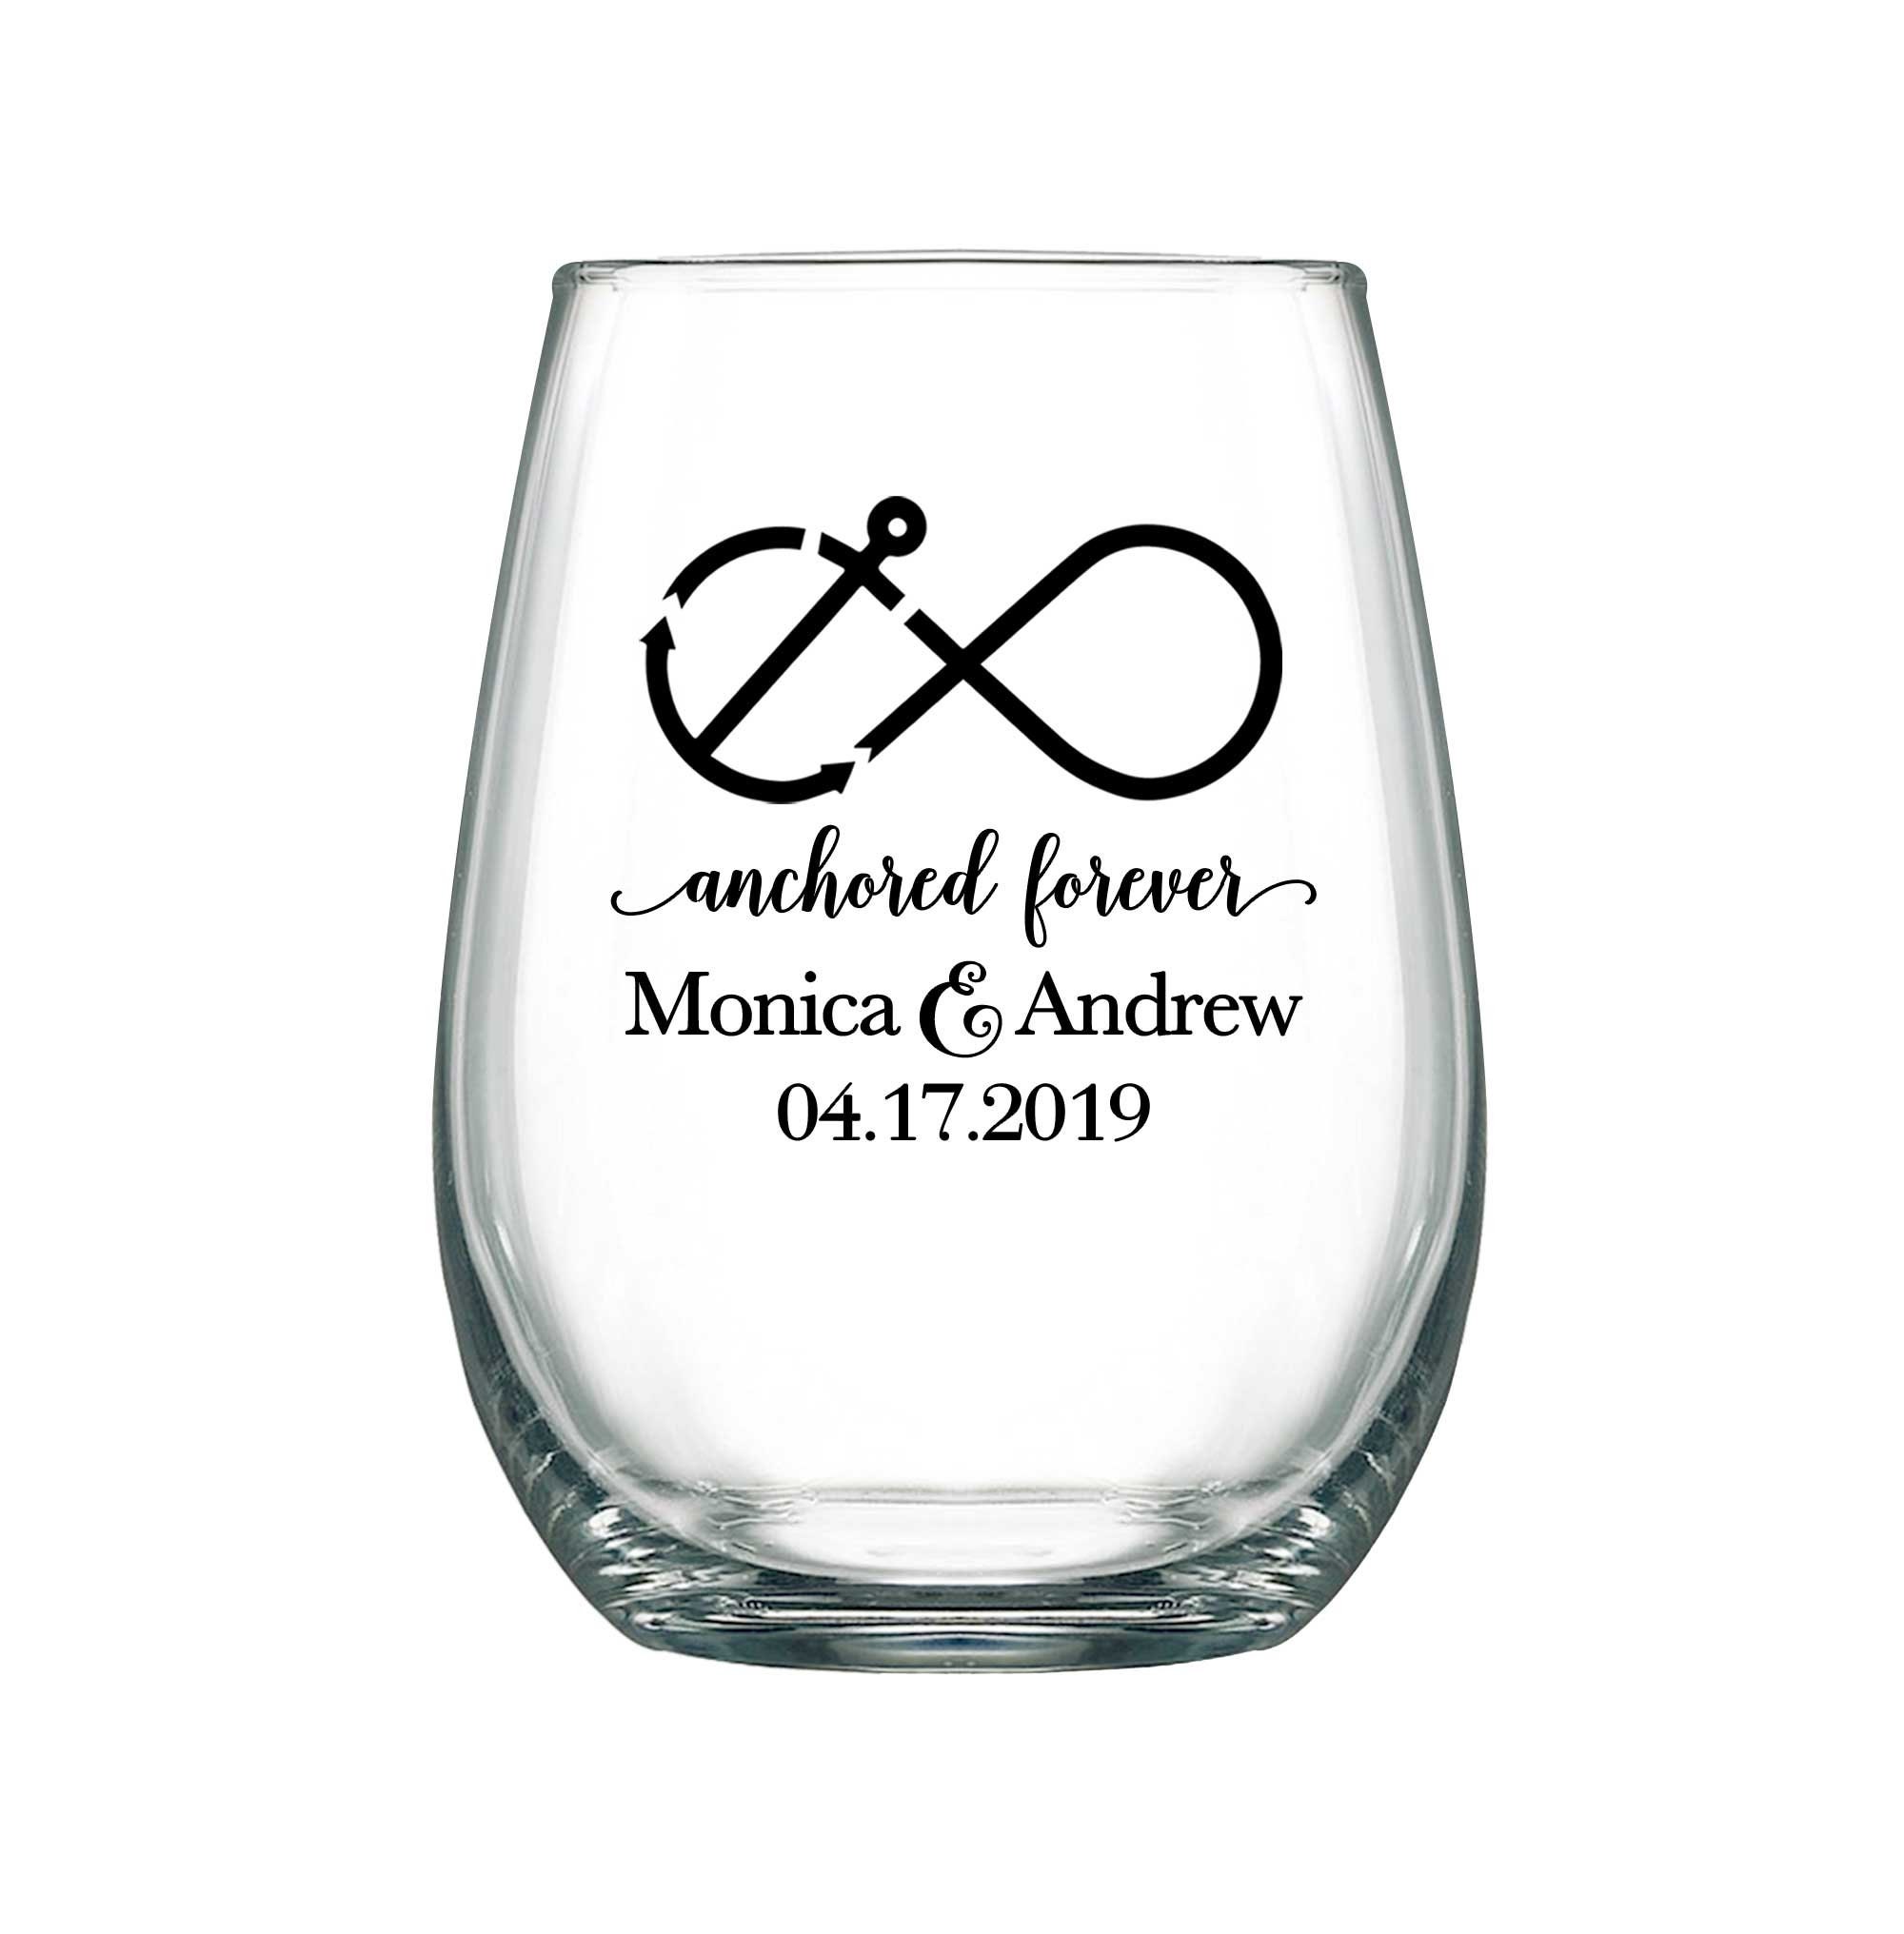 Wedding Wine Glasses Personalized 17Oz Stemless Nautical Favors Party Gifts Anchored Forever 1A